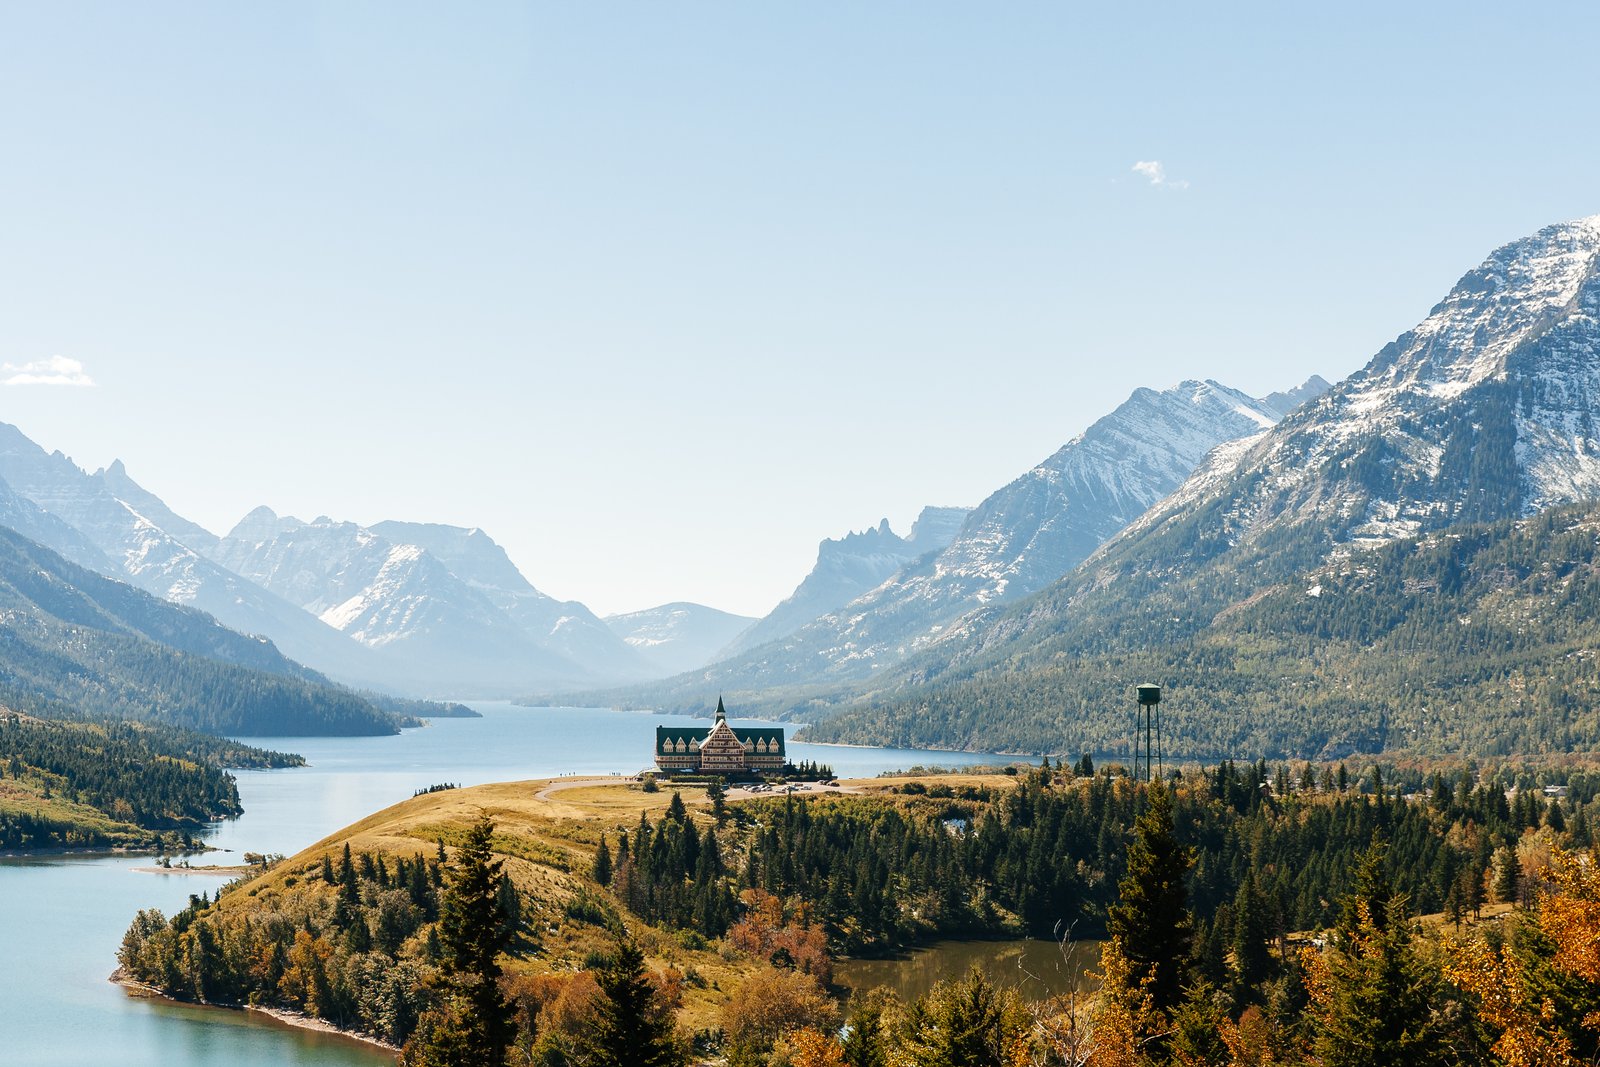 Prince of Wales Hotel in Waterton Lakes National Park with Canadian Rocky mountains landscape behind it.